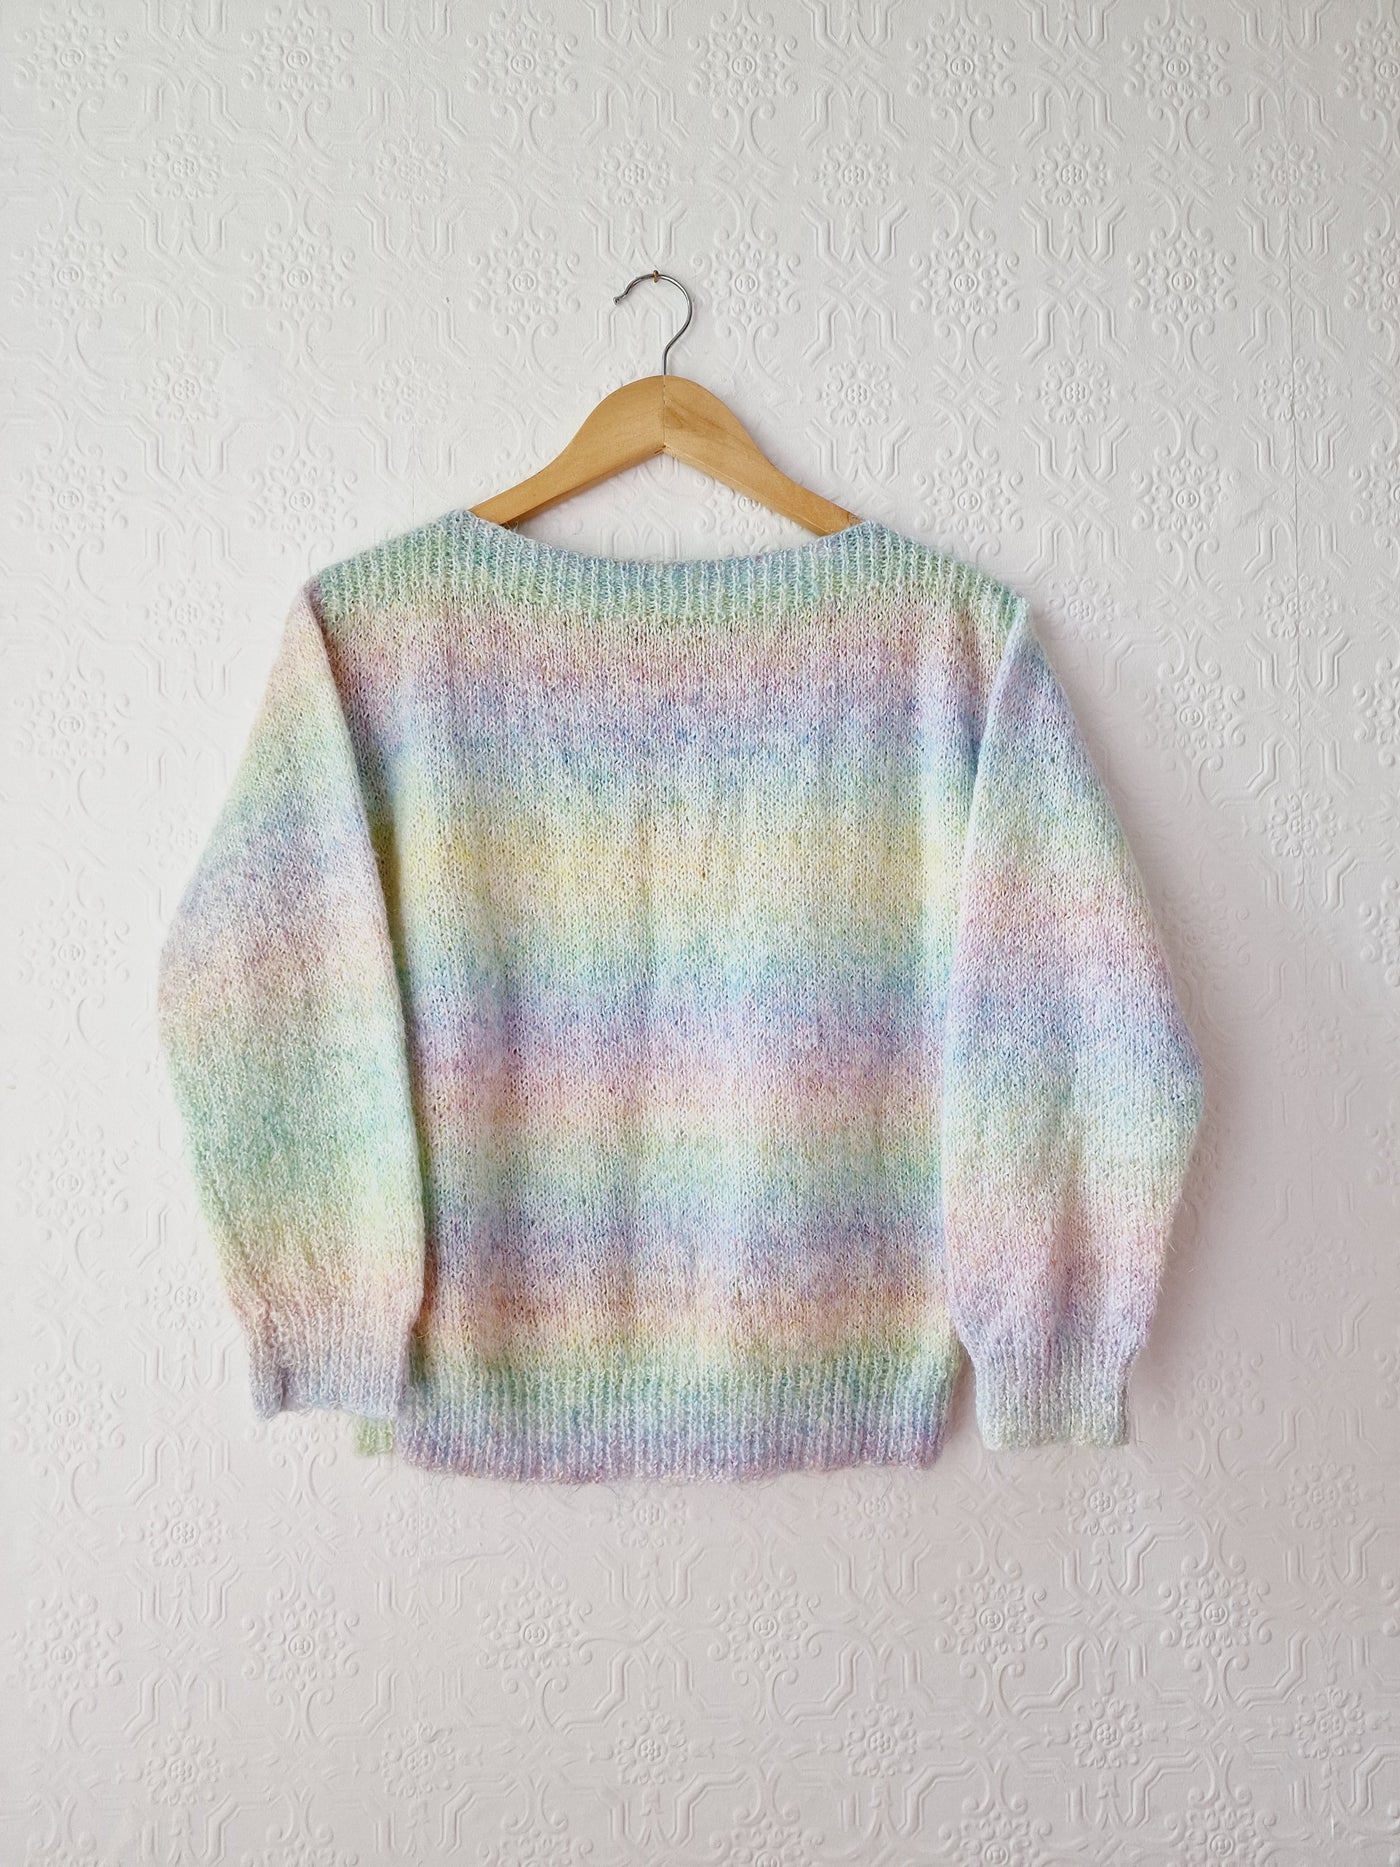 Vintage 80s Pastel Rainbow Handknitted Jumper with Boat Neck - S